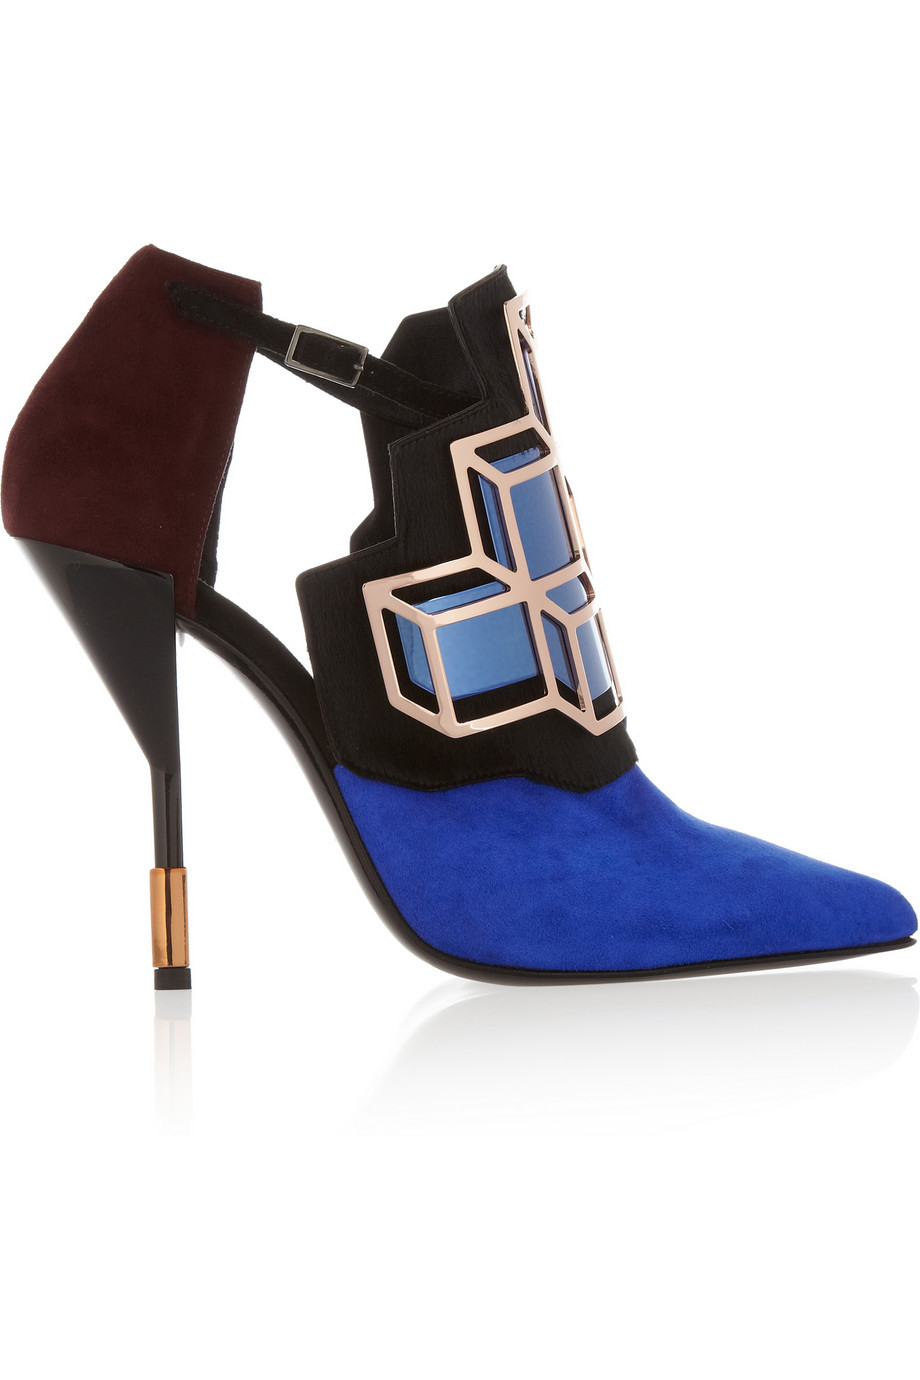 Lyst - Pierre Hardy Embellished Suede and Calf Hair Pumps in Blue